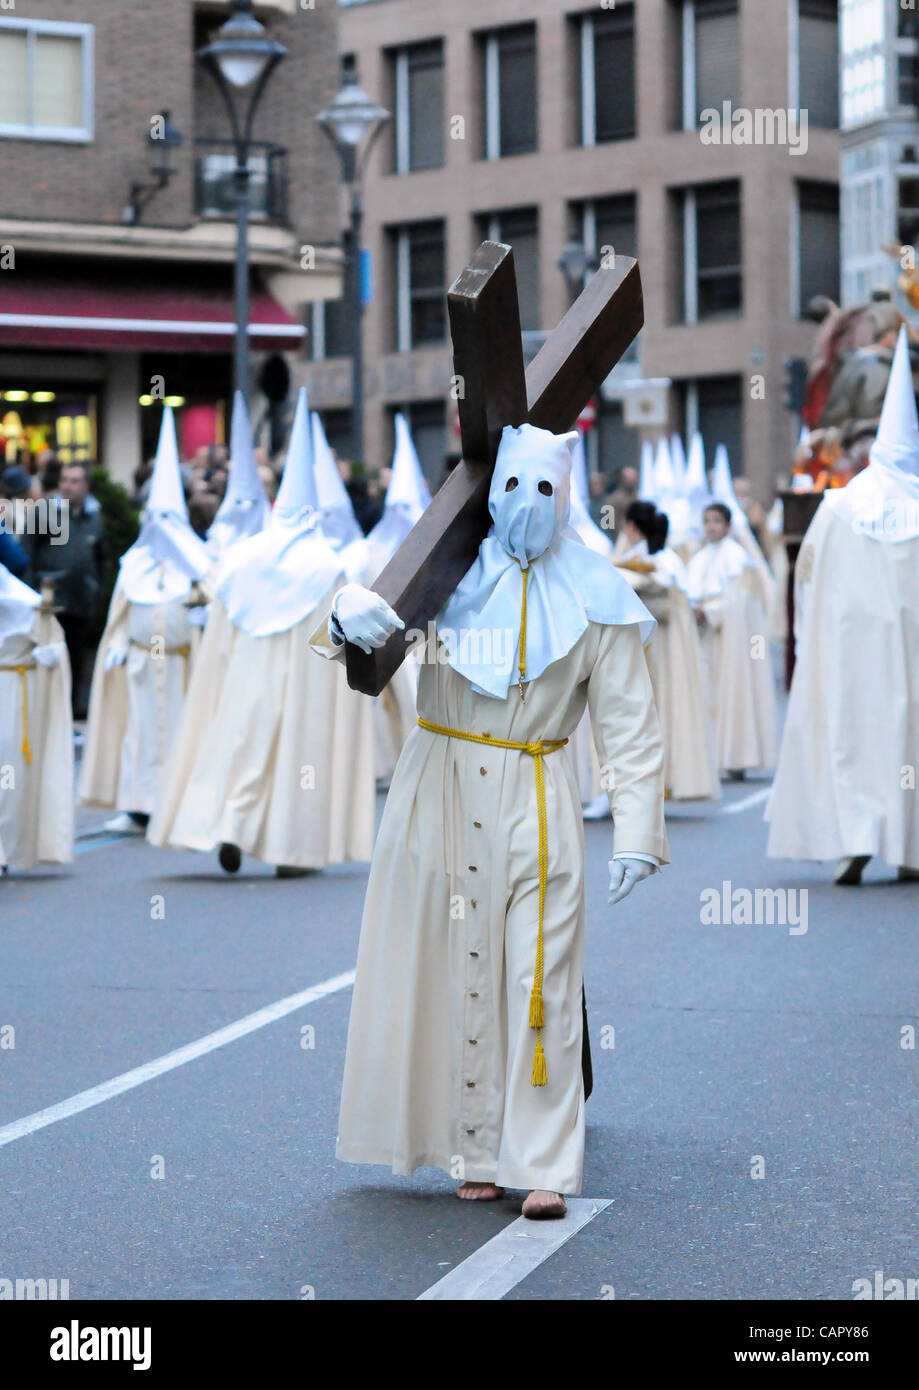 Semana Santa 2012: Traditional processions of Easter in the spanish city of Valladolid Penitent of the Cofradia de la Ultima Cena carrying a cross to emulate Jesus calvary. Stock Photo